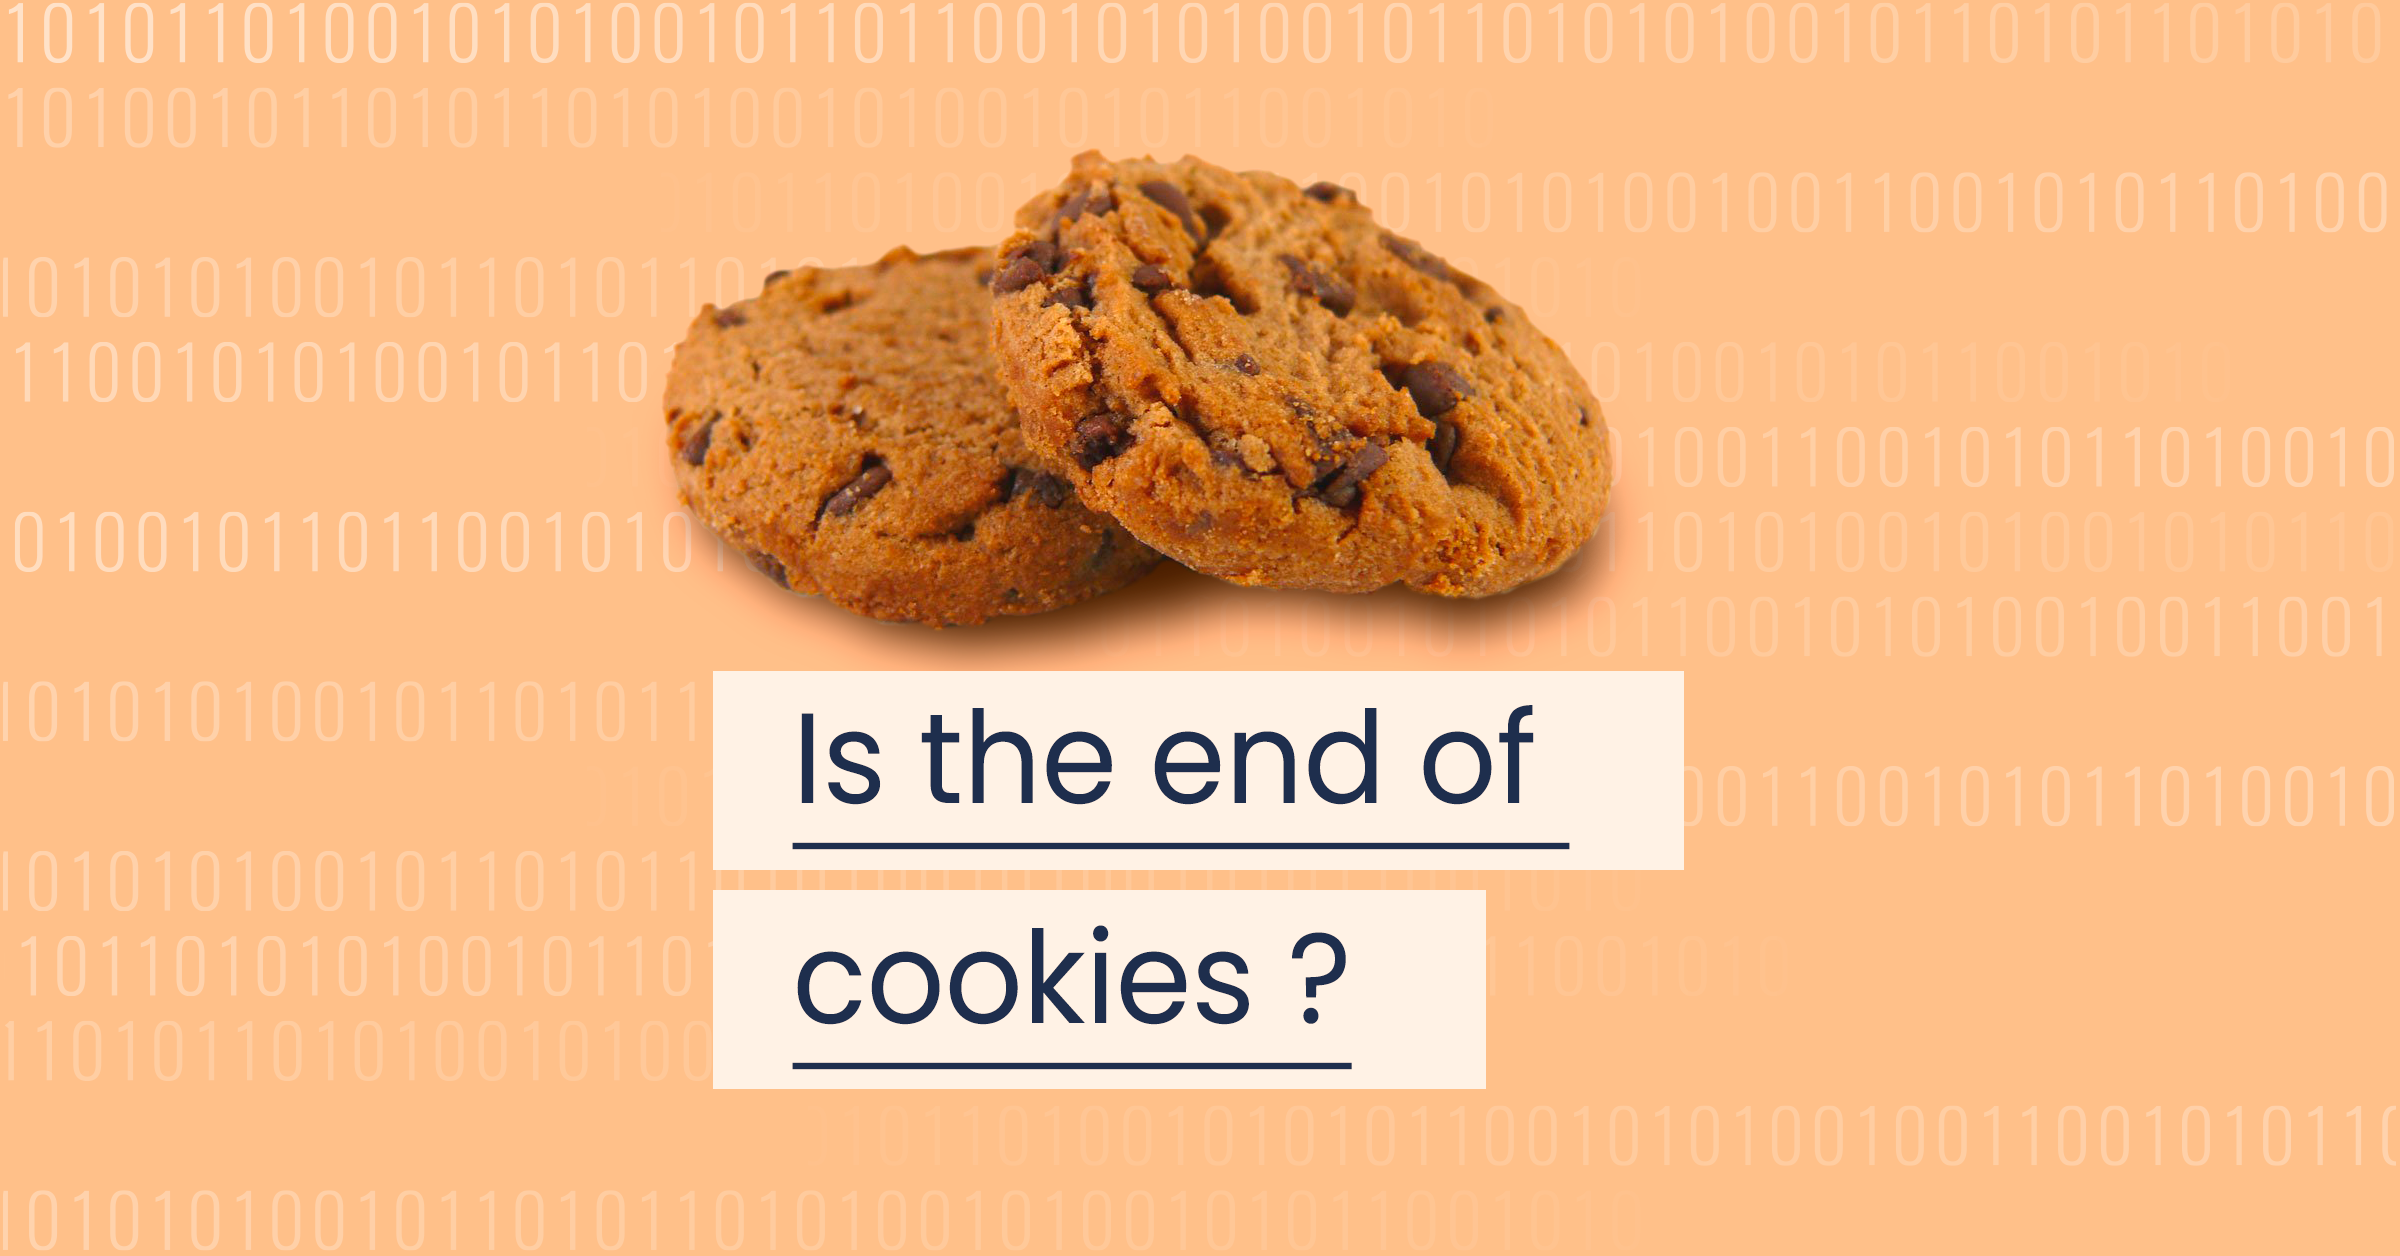 Is the end of 3rd party cookies really an issue?